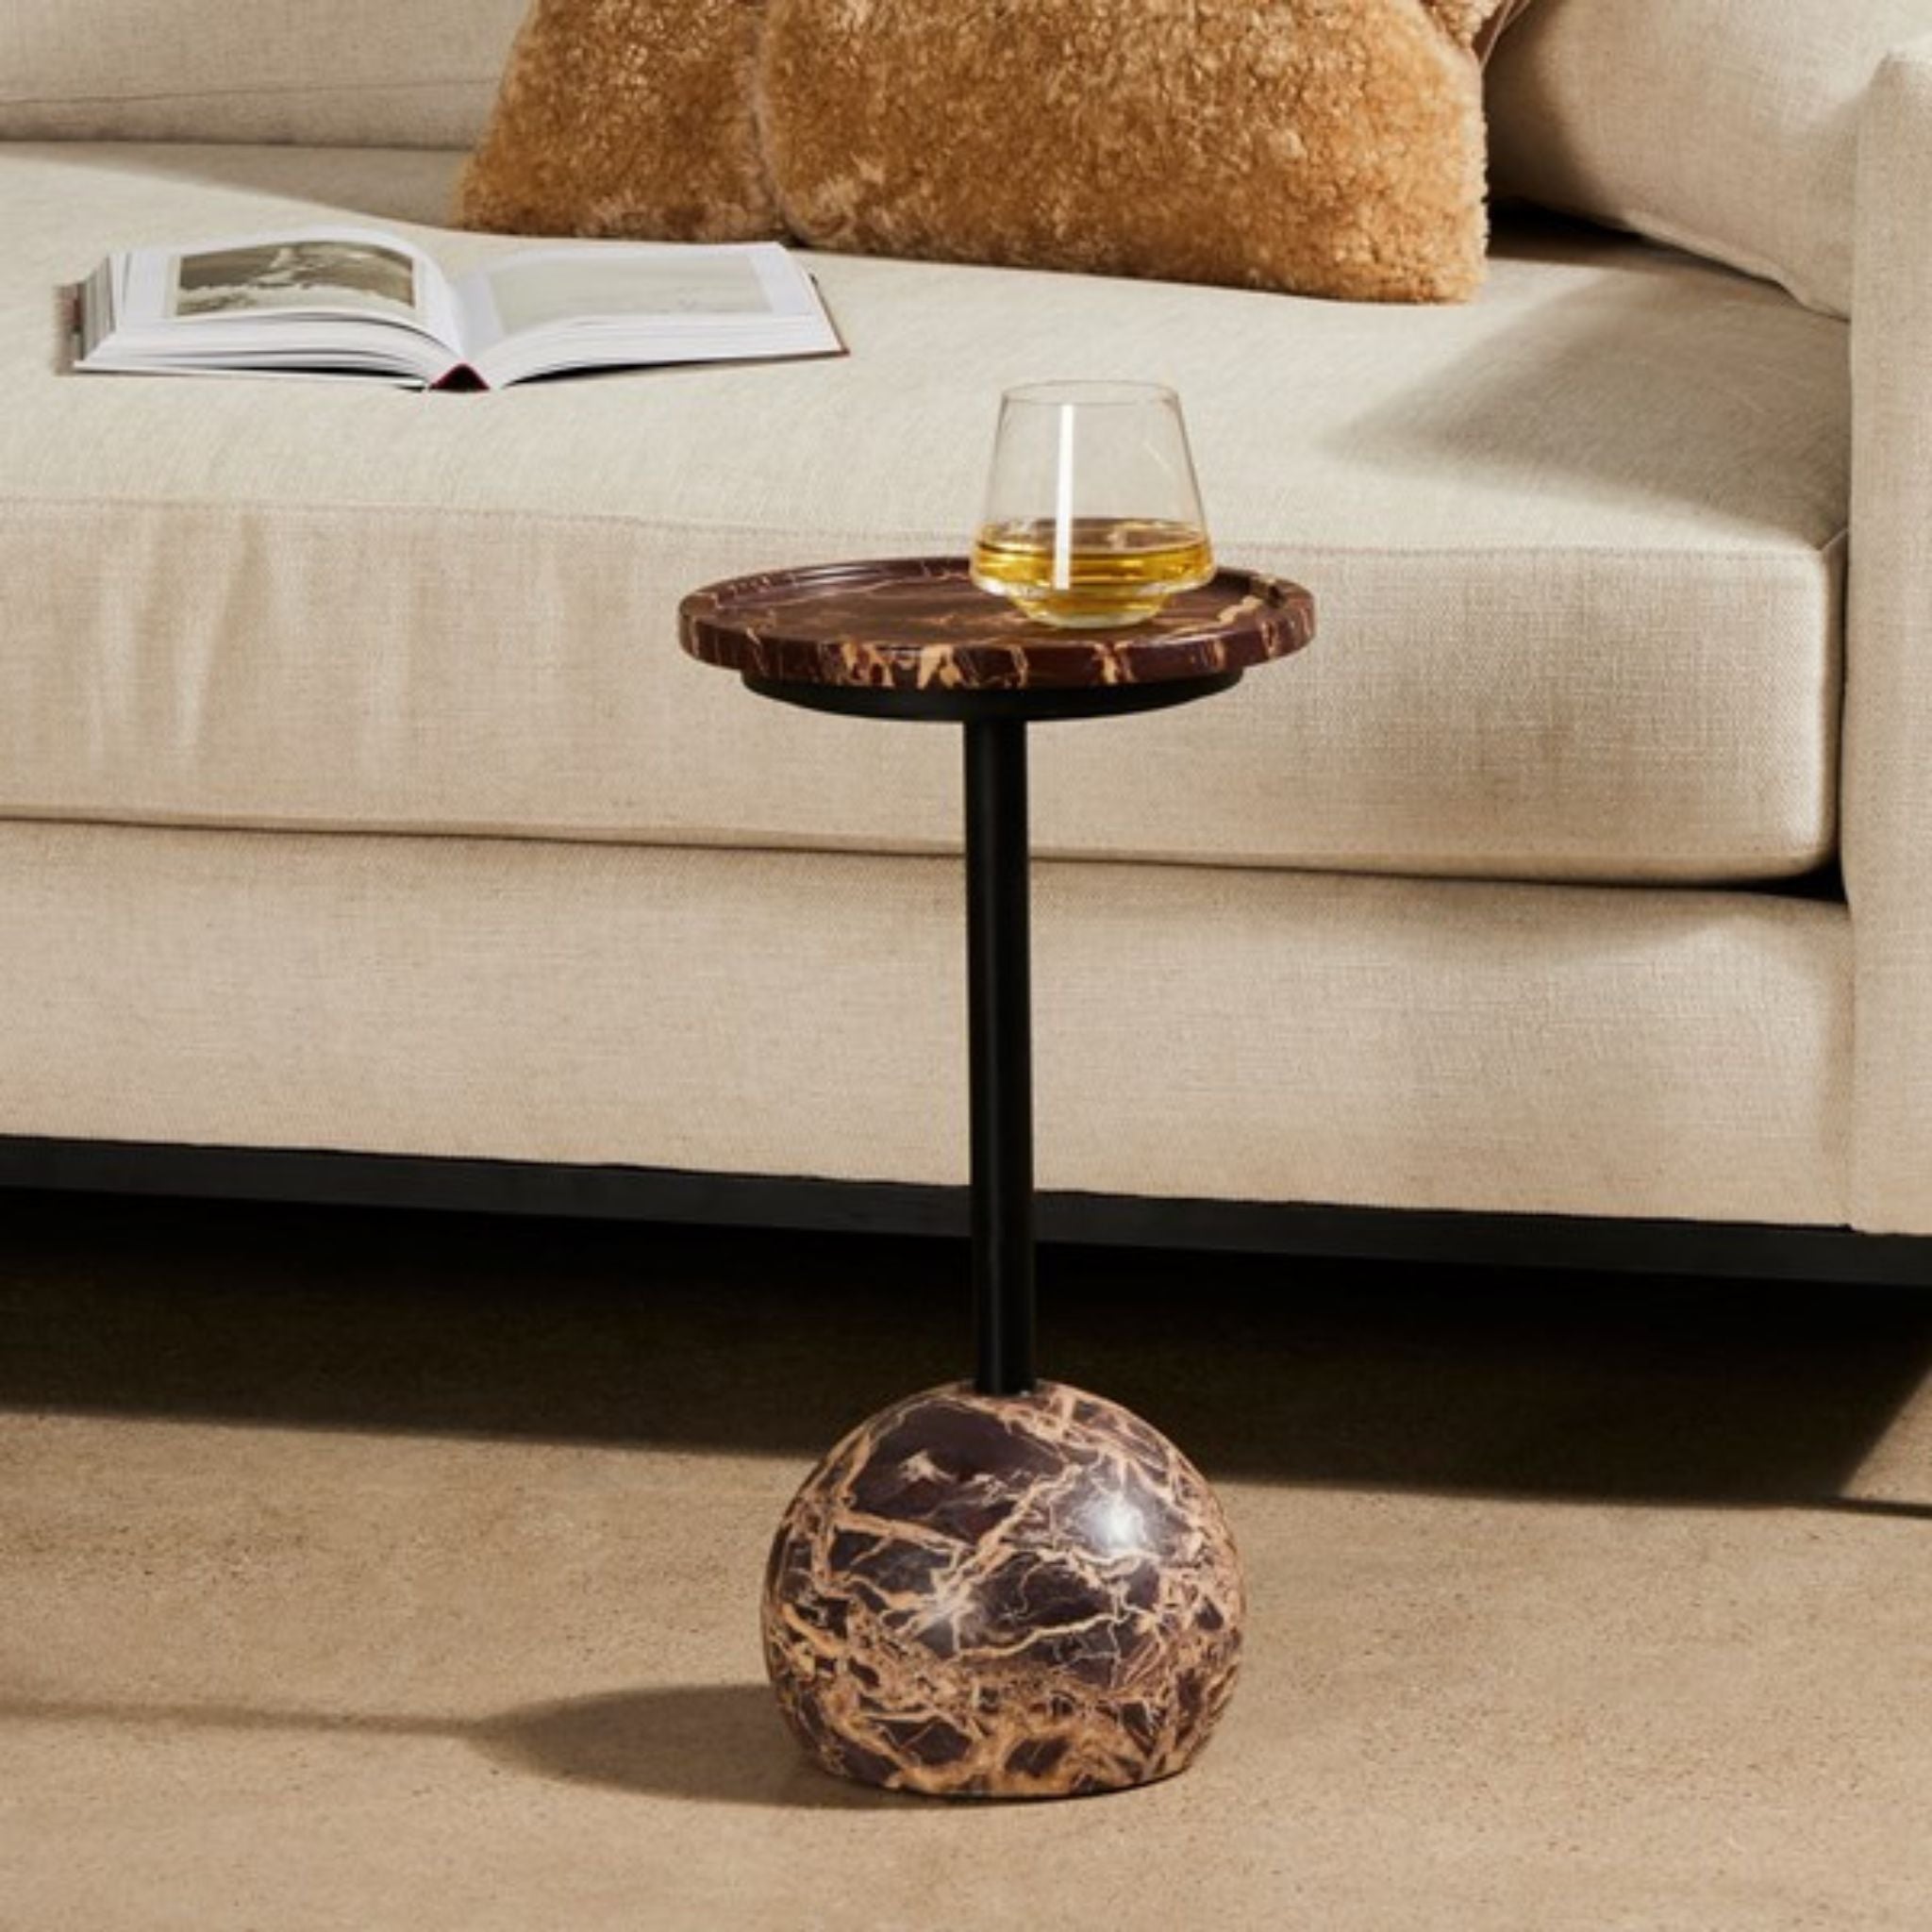 VIOLA ACCENT TABLE - MERLOT - Simply Elevated Home Furnishing SLC 